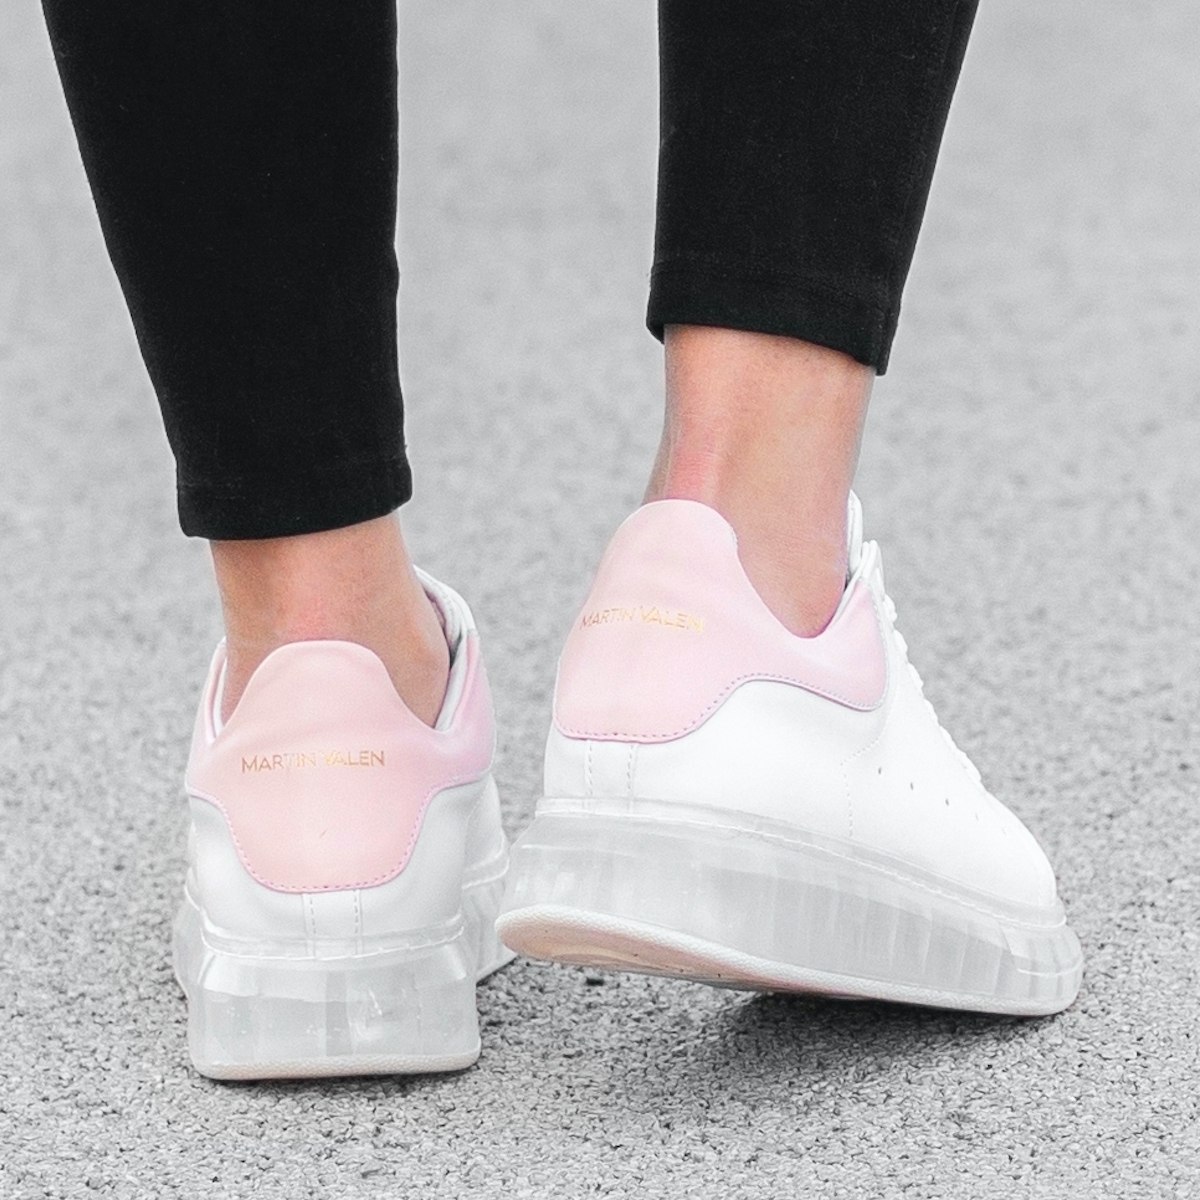 Women's O2 Transparent Hype Sole Sneakers In White-Pink | Martin Valen